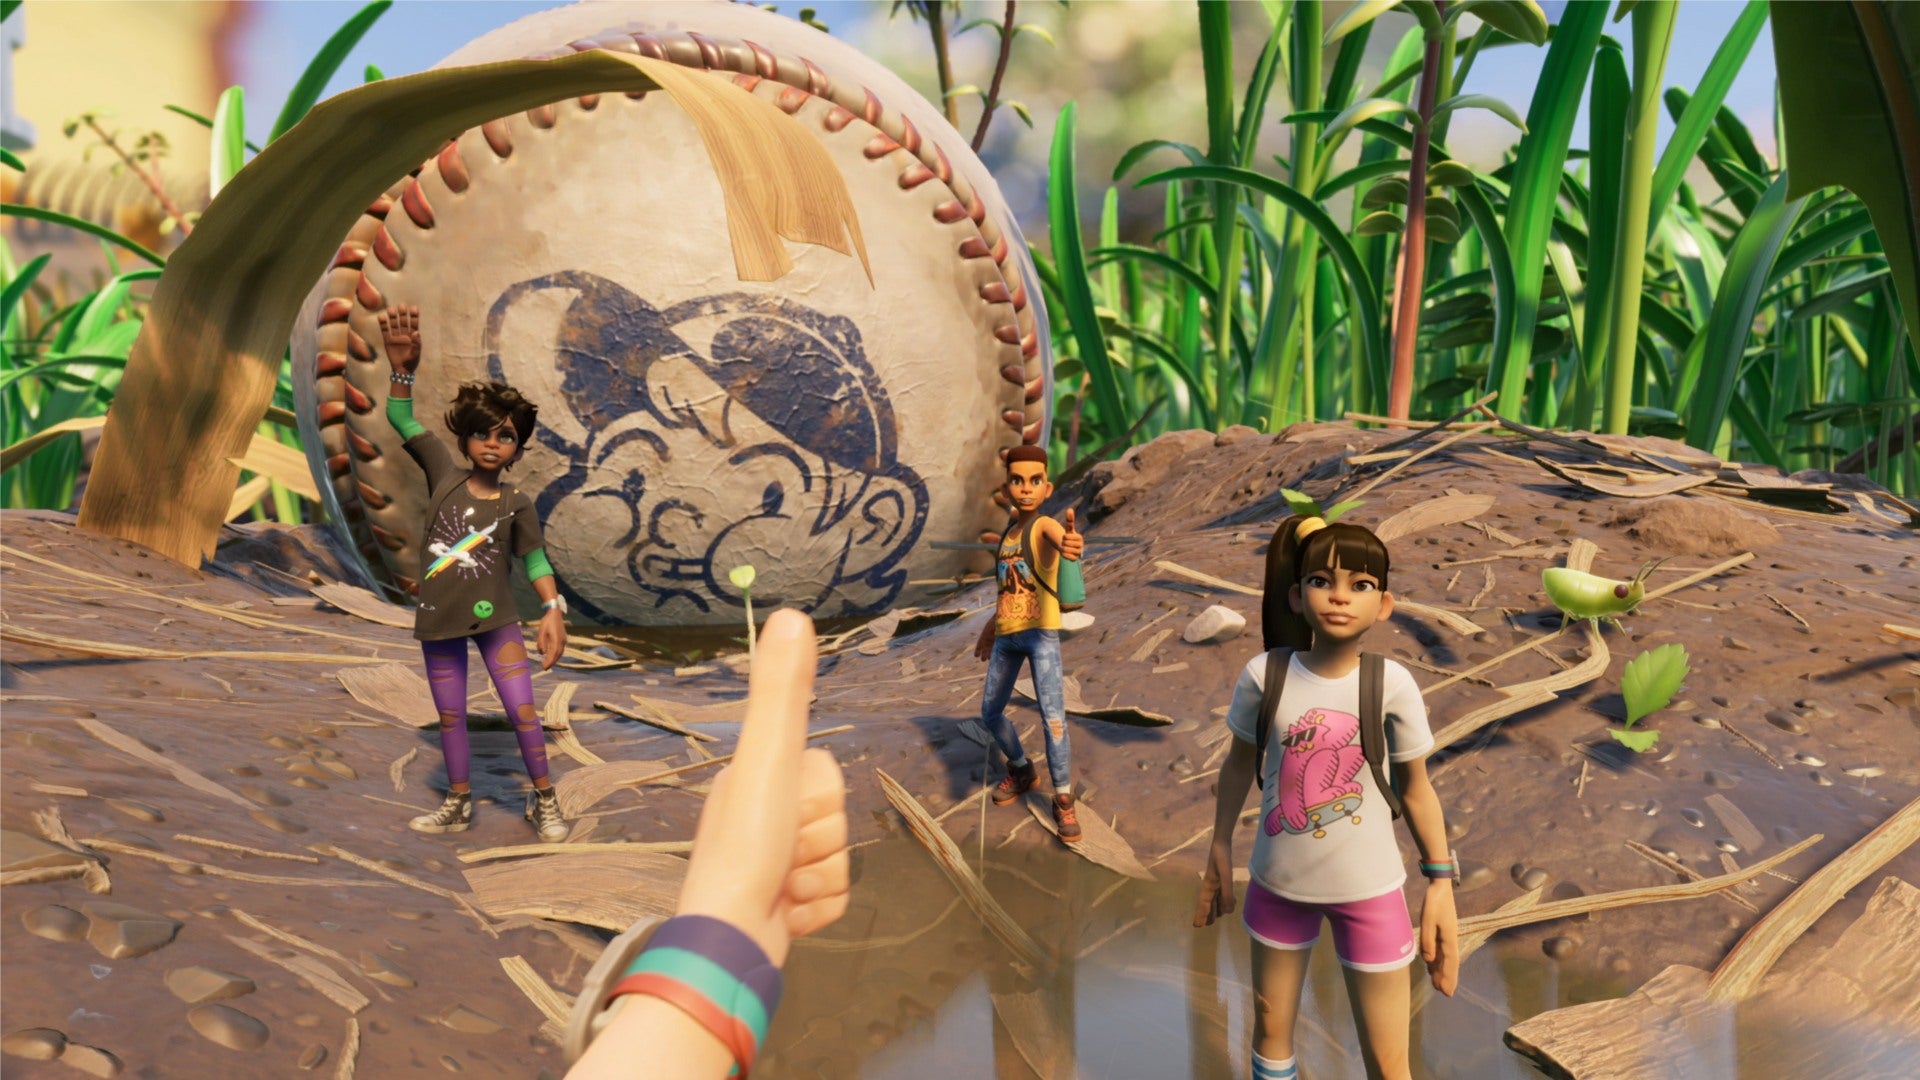 Grounded characters standing in the dirt near a giant baseball while staring at the player, with the player giving them a thumbs up.